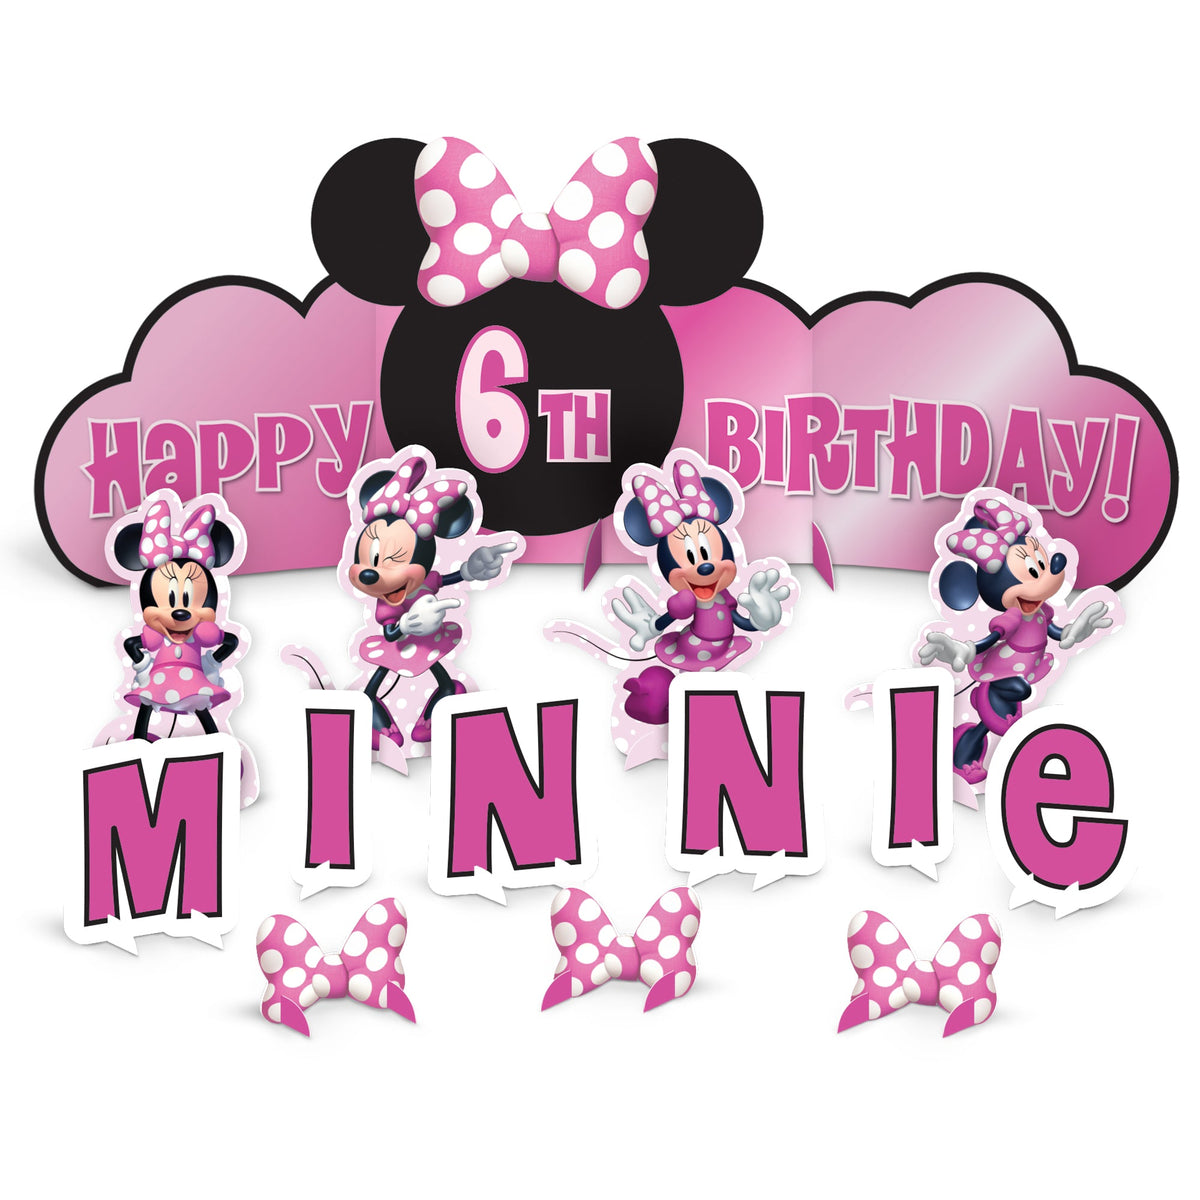 Minnie Mouse Forever Table 14 piece Decorating Kit w/ 28 personalizing stickers